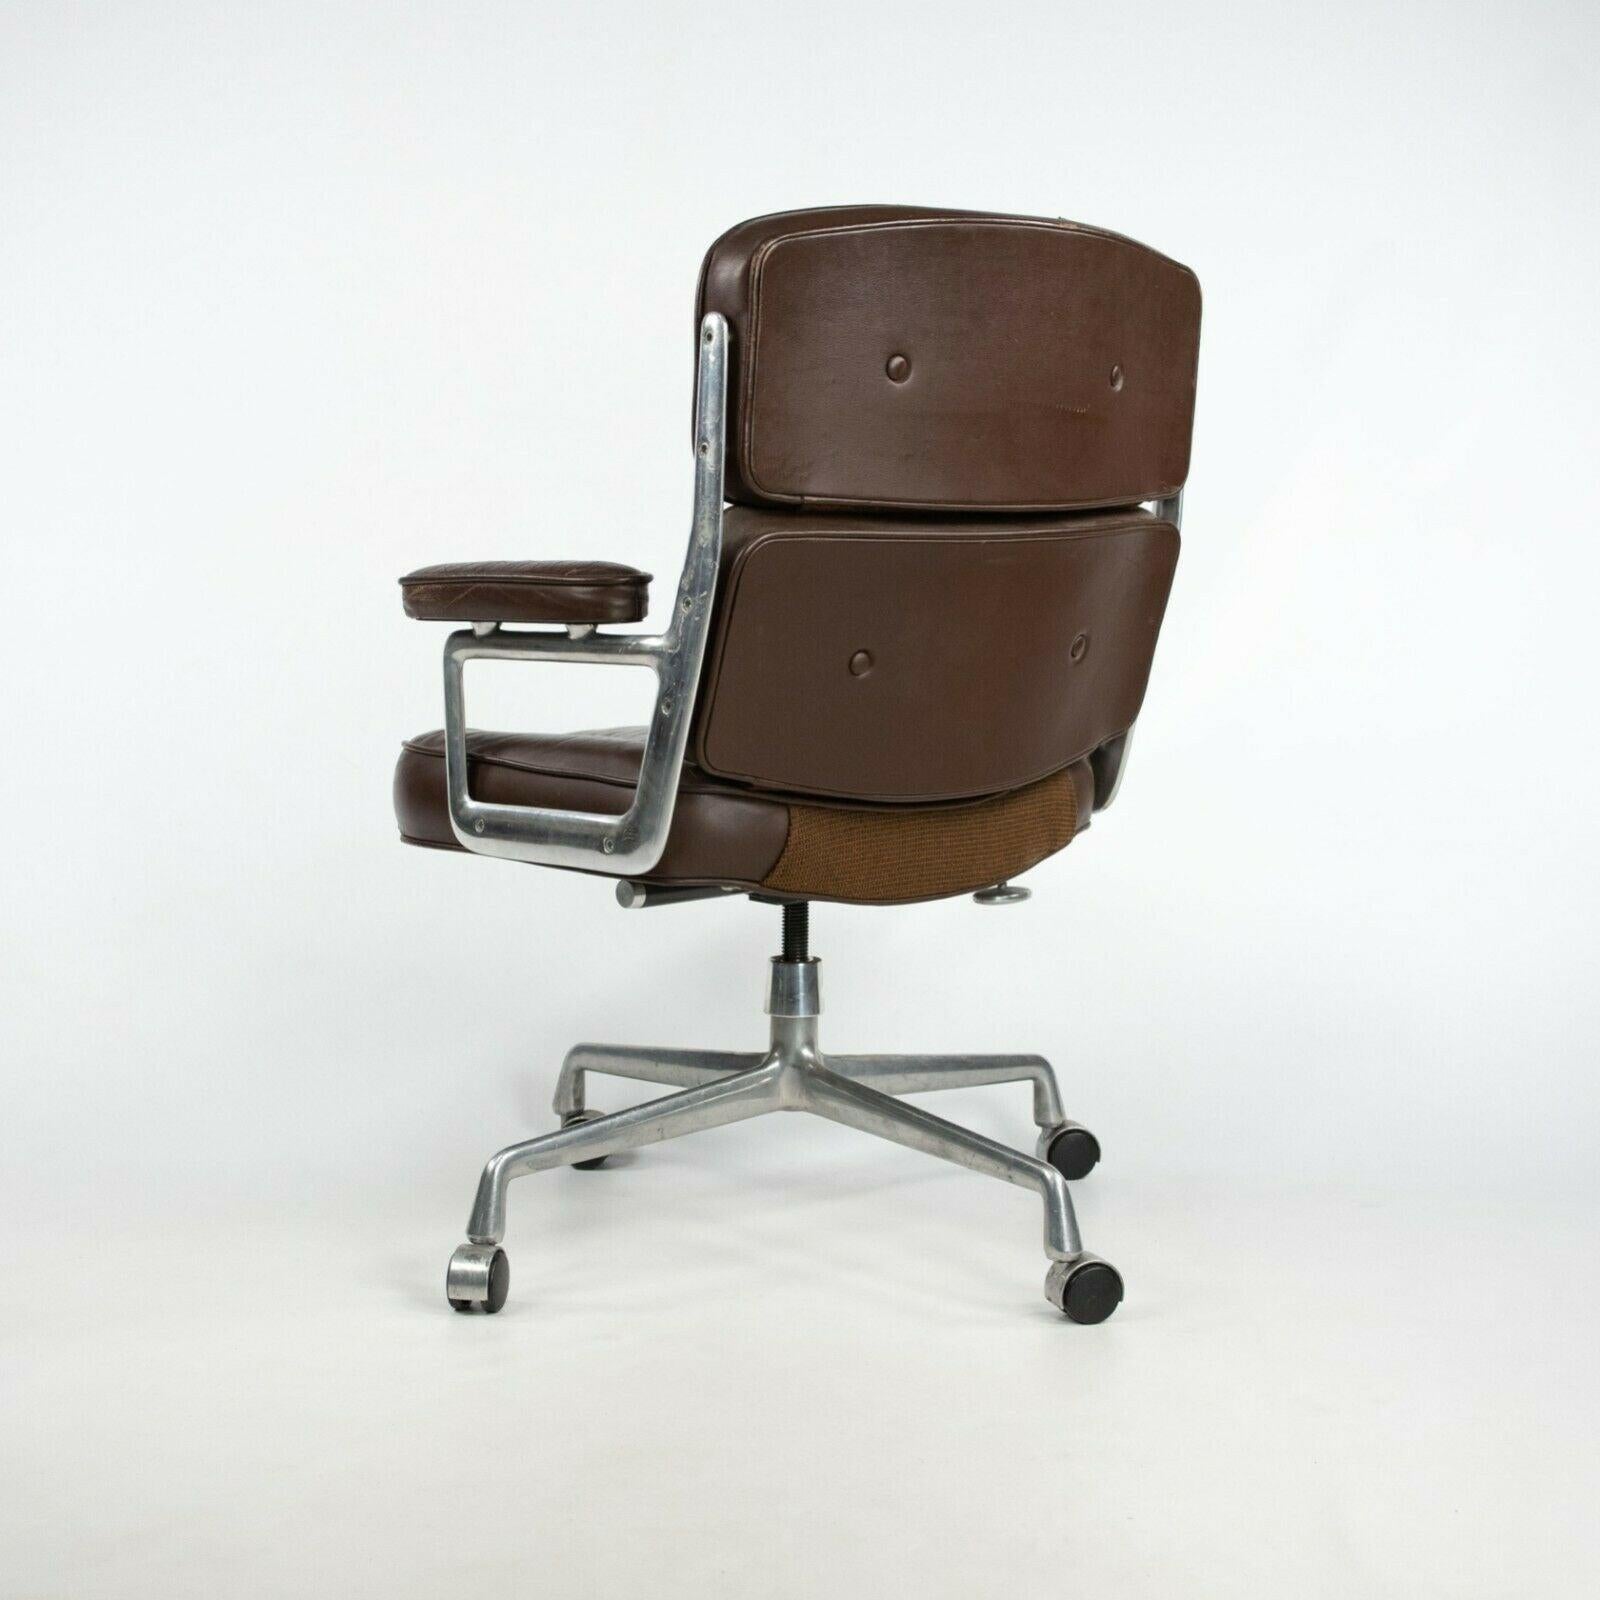 Modern 1989 Herman Miller Eames Time Life Executive Desk Chair in Brown Leather